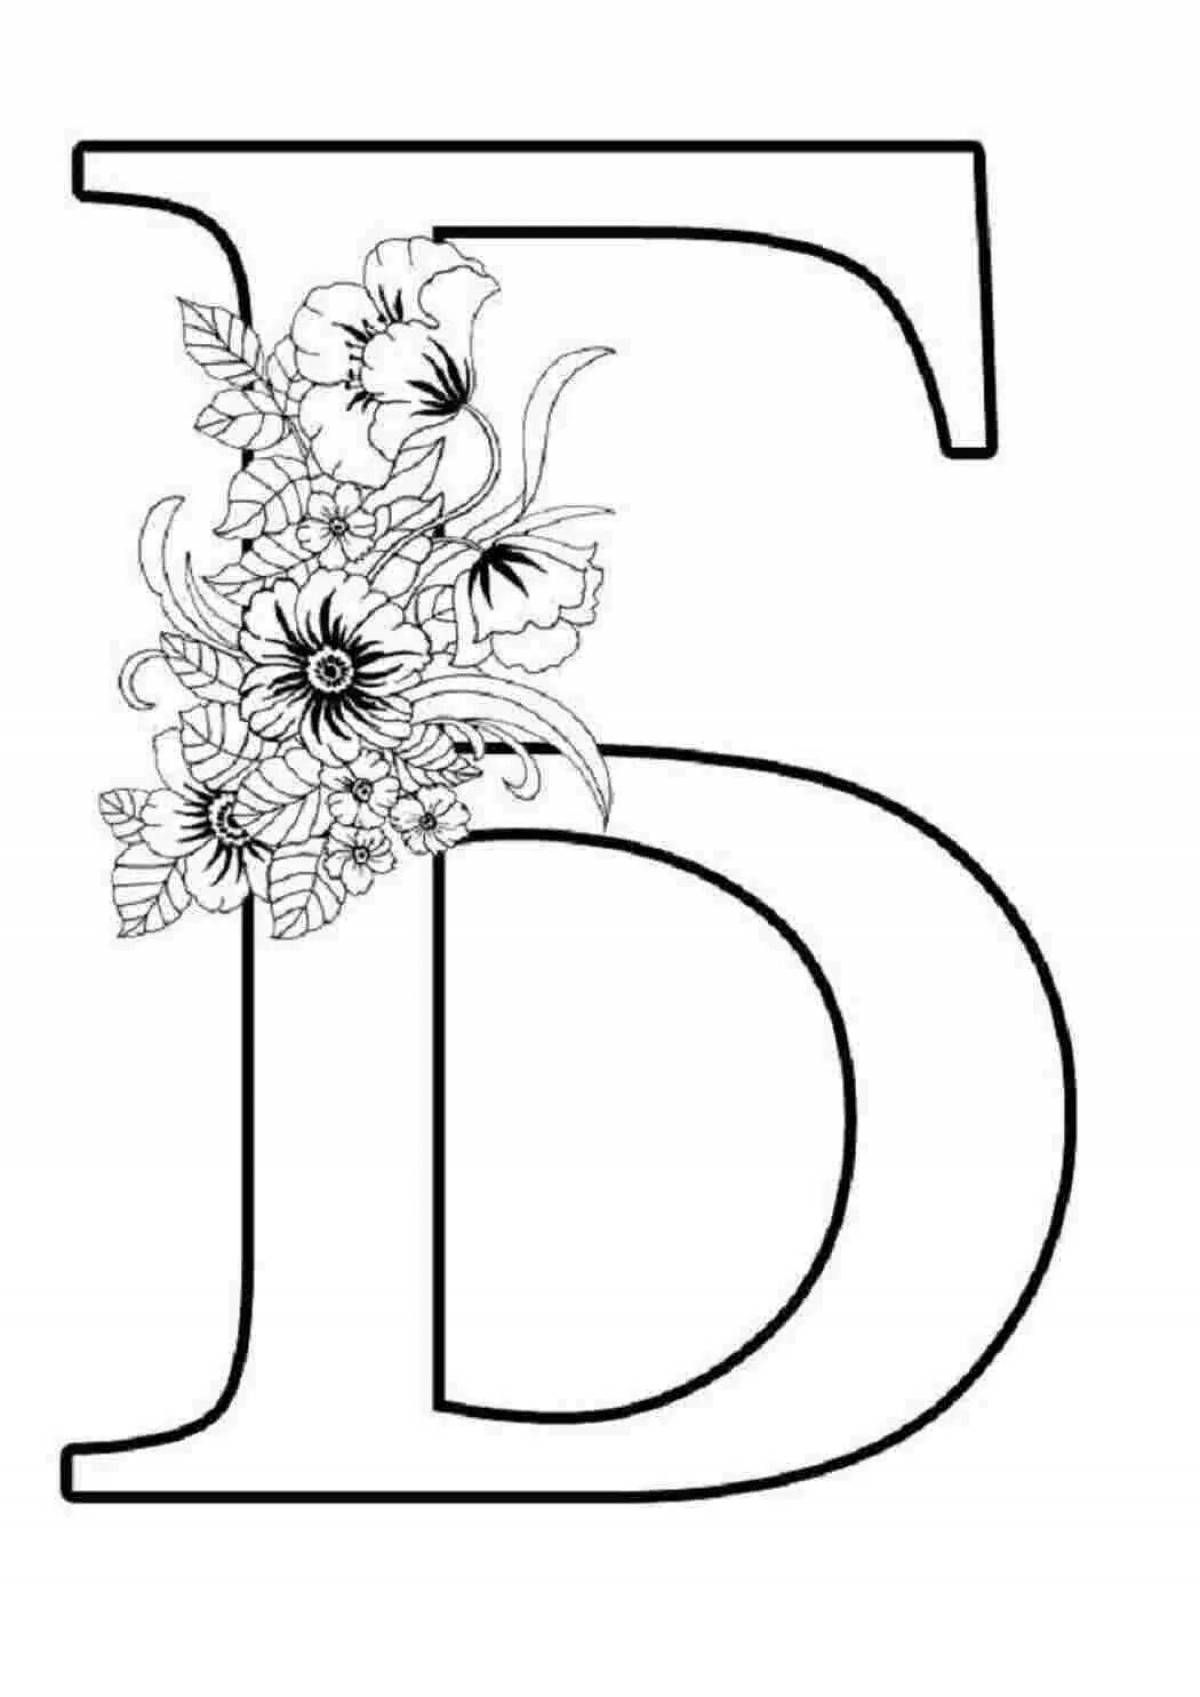 Glossy letter c with flowers